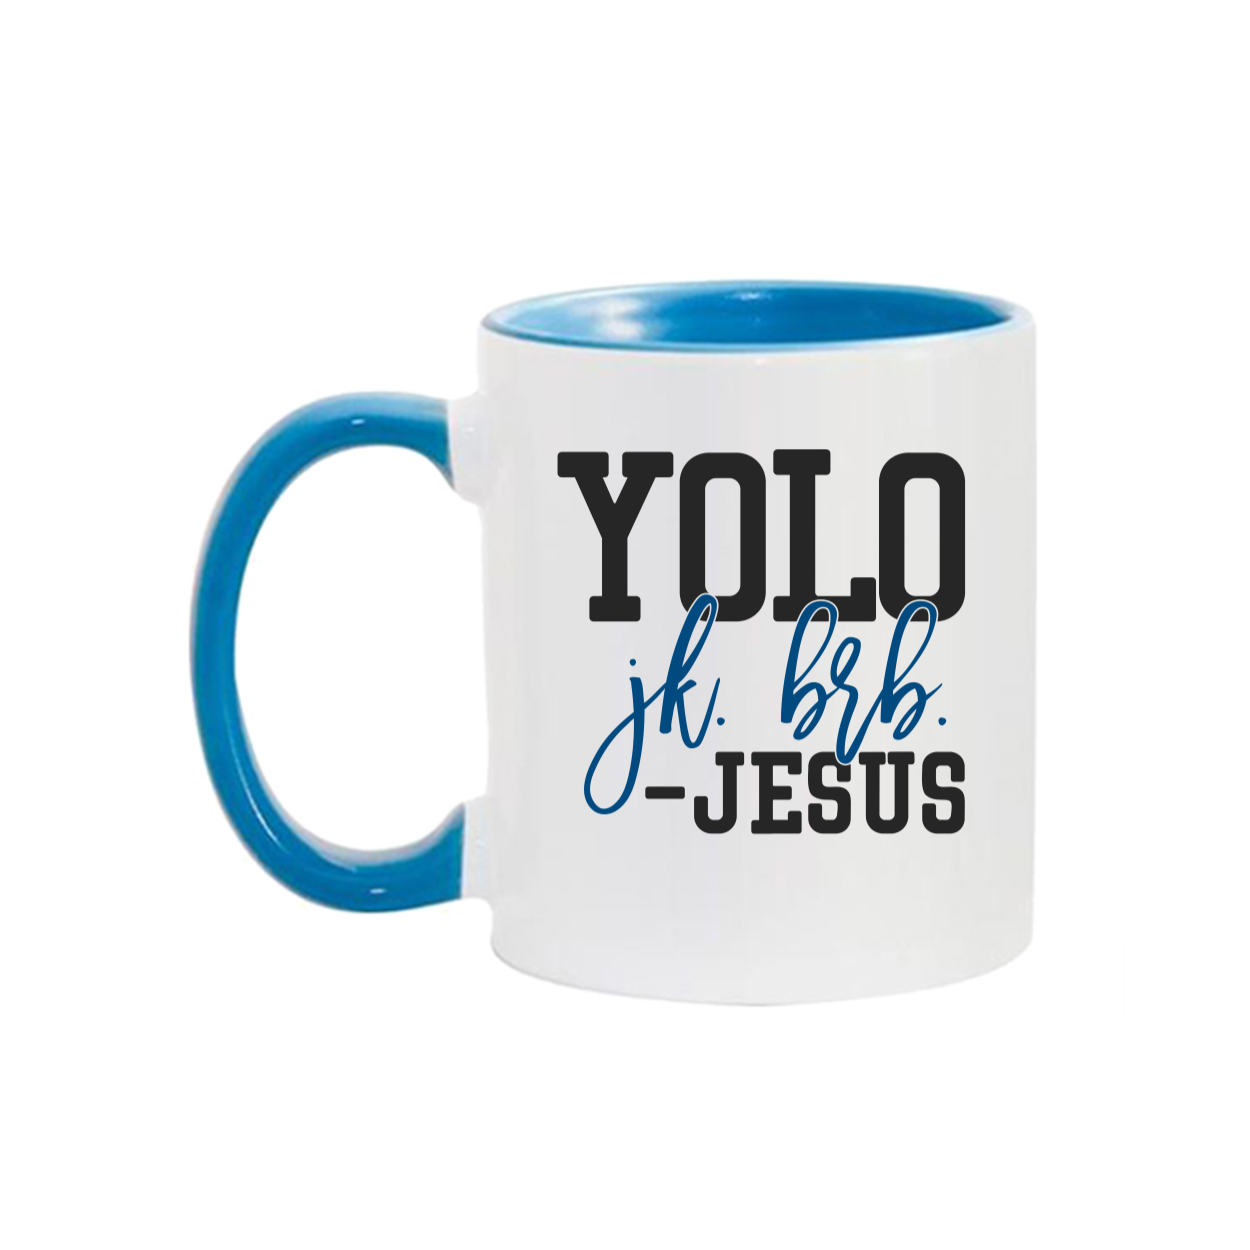 YOLO FITTED'S BRB JESUS MUG - Yolofitted